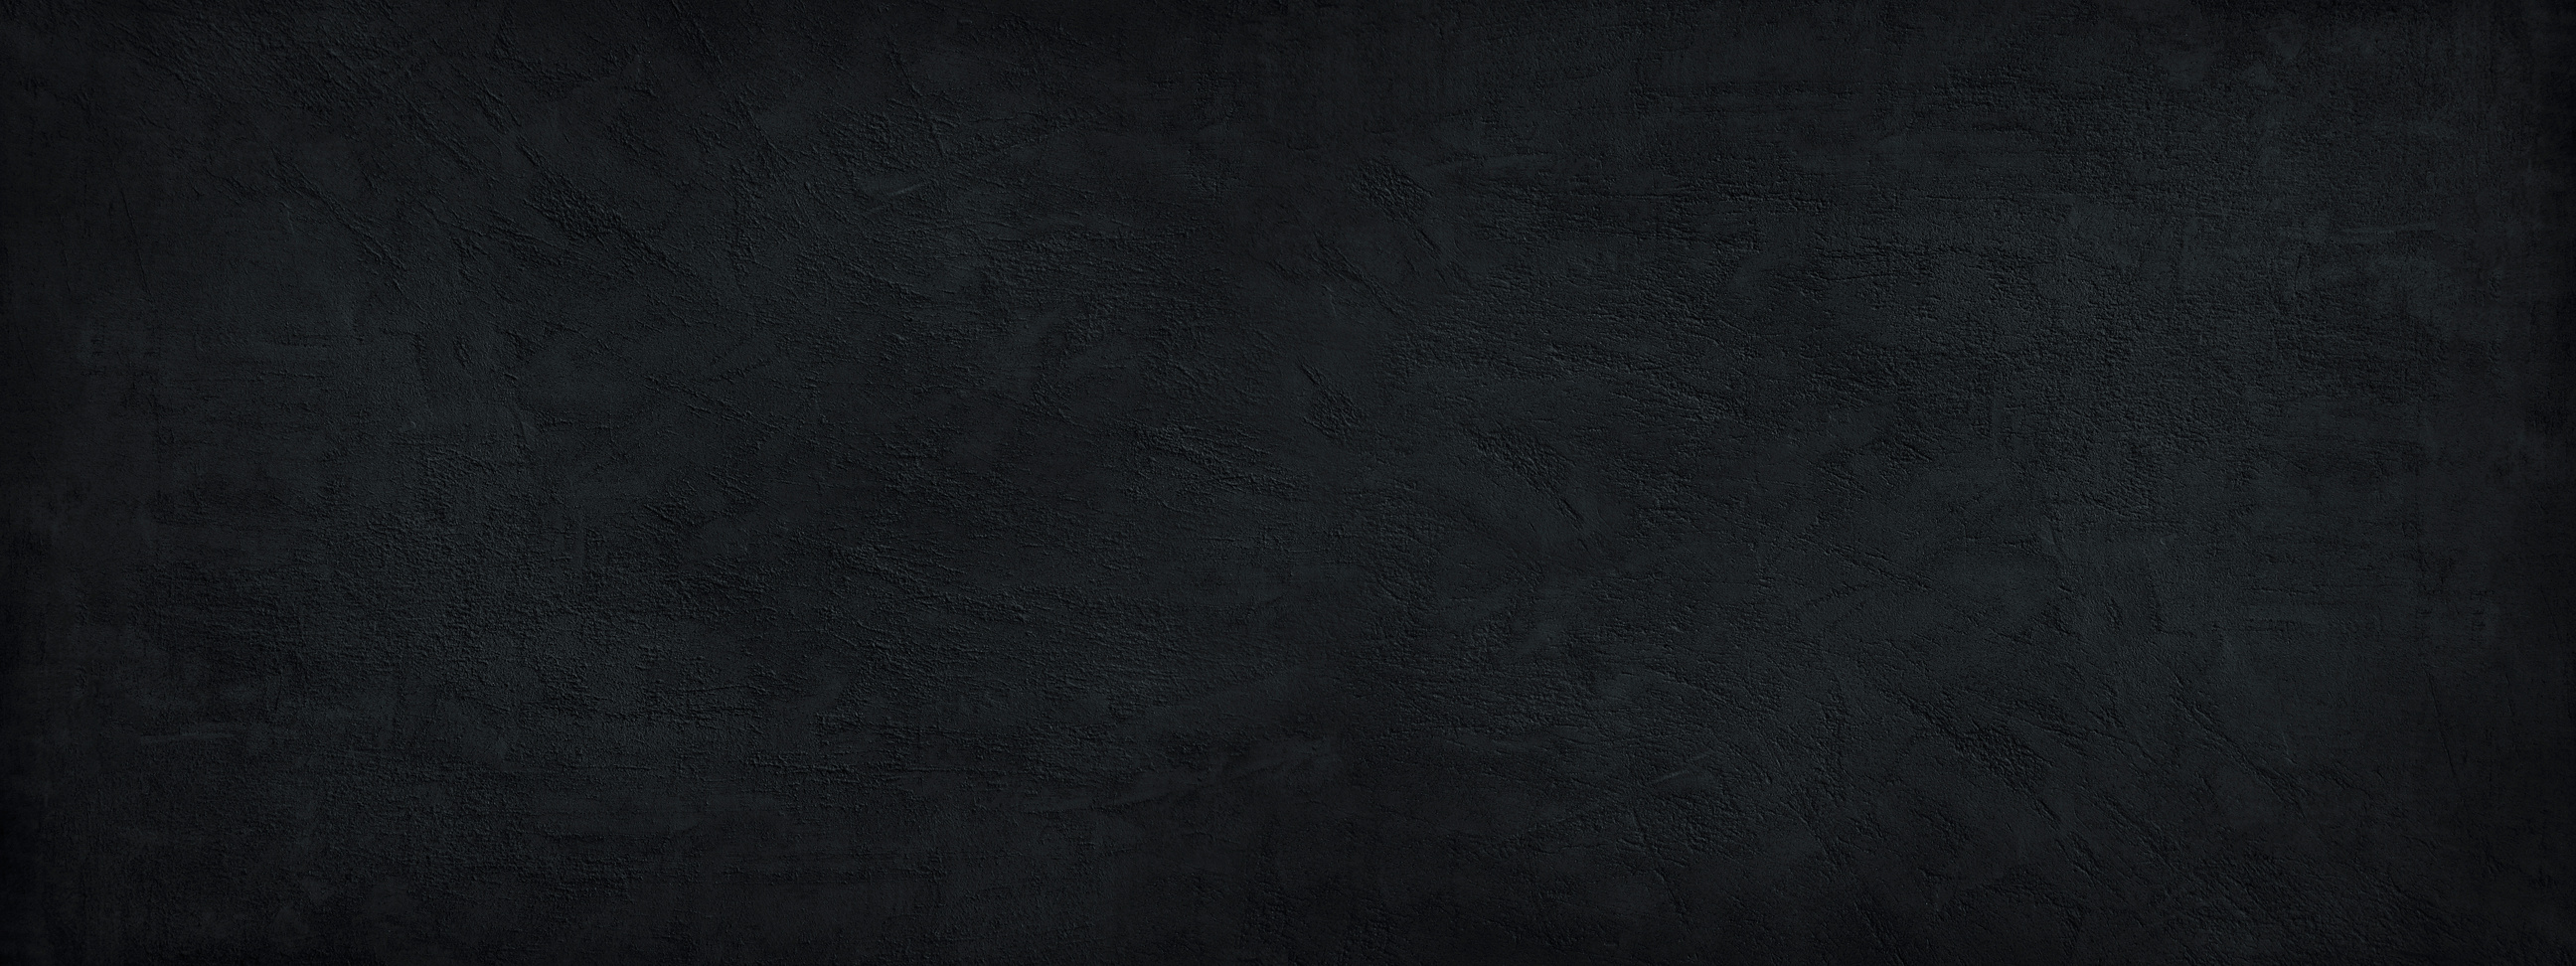 Black stone background. Black banner with concrete wall surface texture.